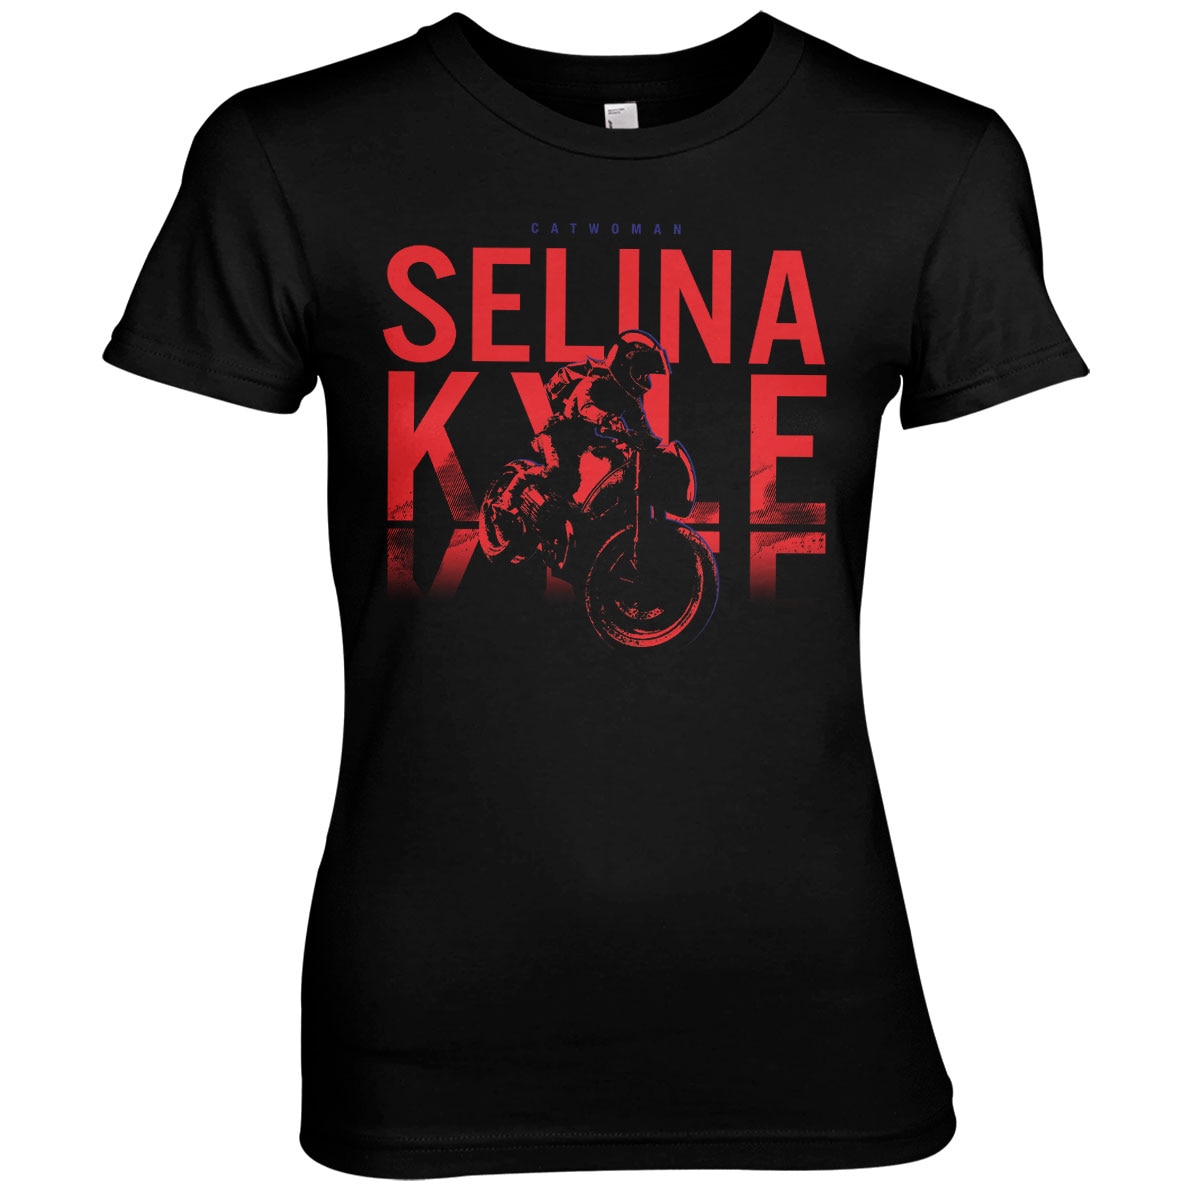 Selina Kyle is Catwoman Girly Tee